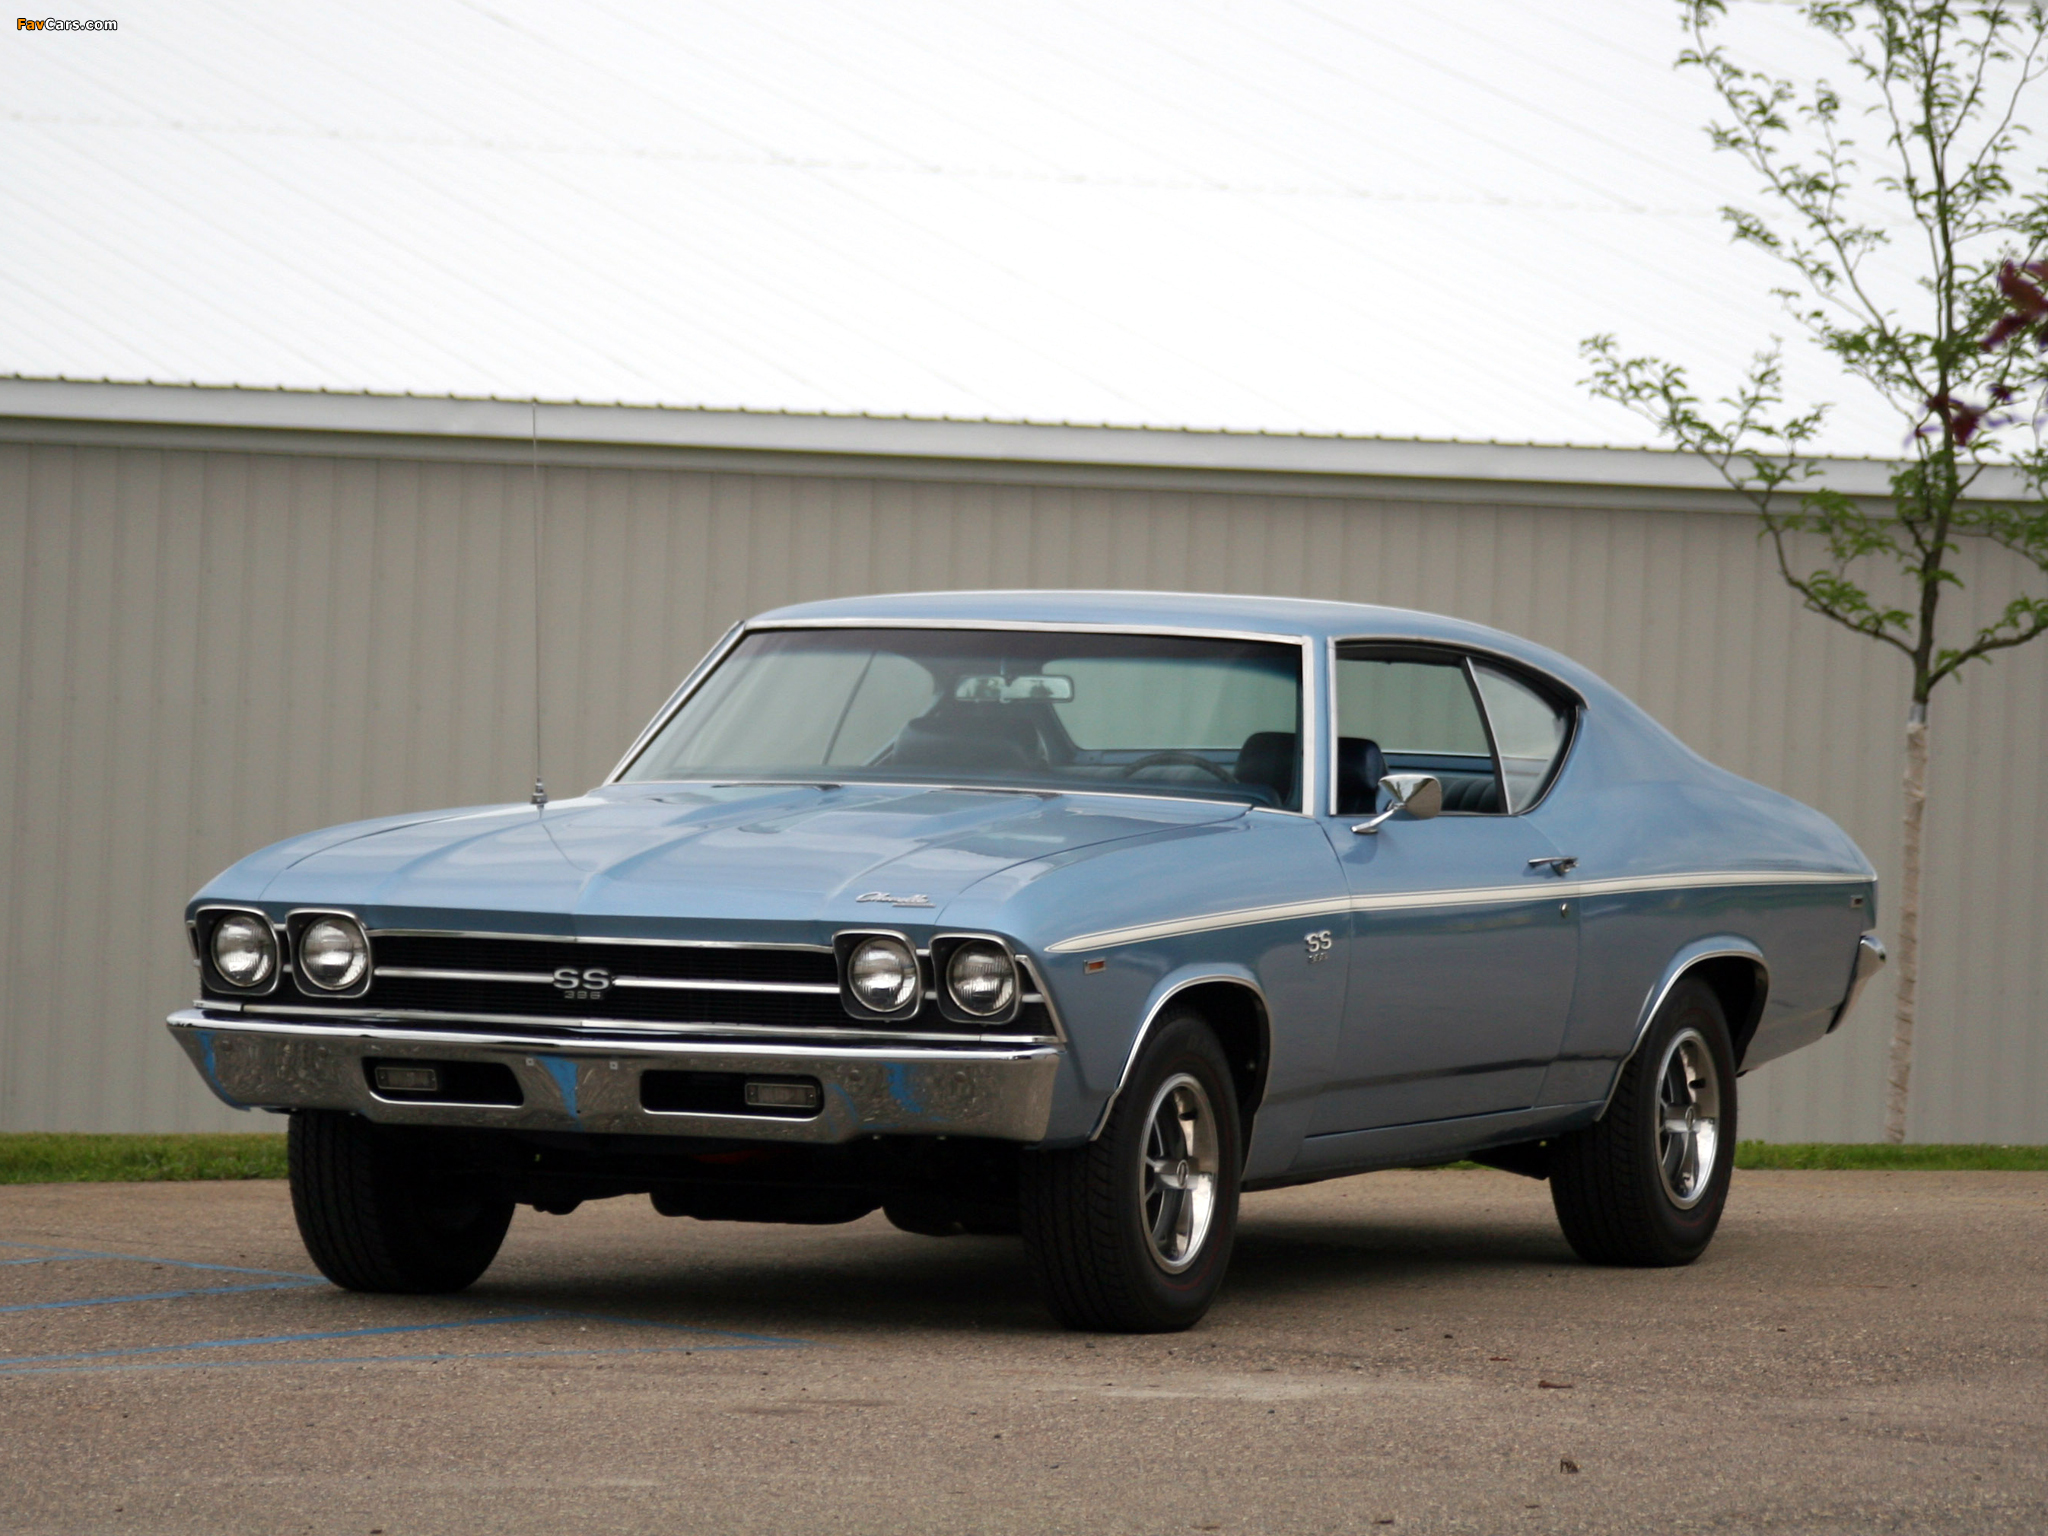  chevelle ss 396 hardtop coupe 1969 wallpapers 2048 x 1536 Car Pictures 2048x1536